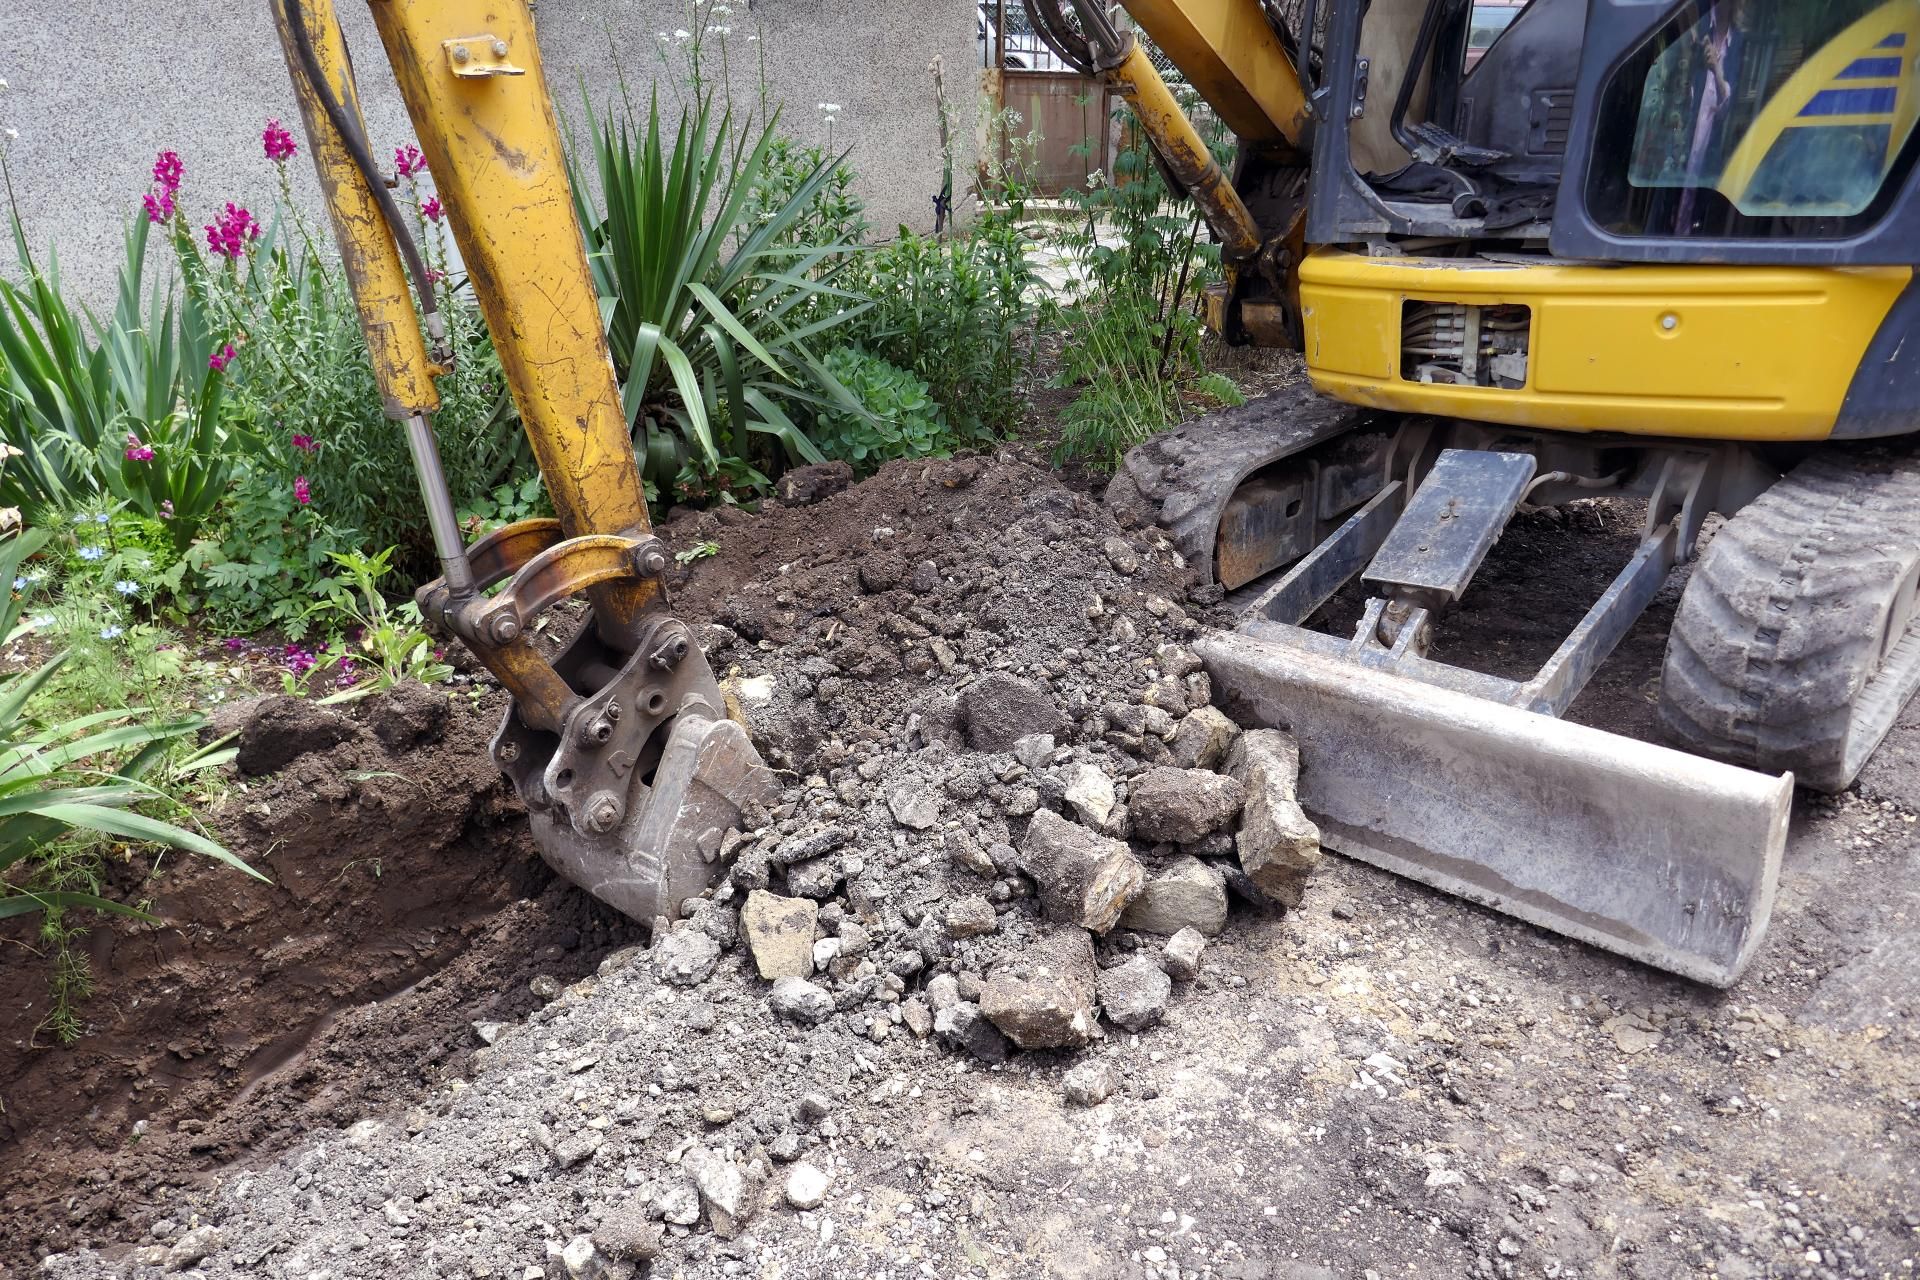 a yellow excavator is digging a hole in the ground